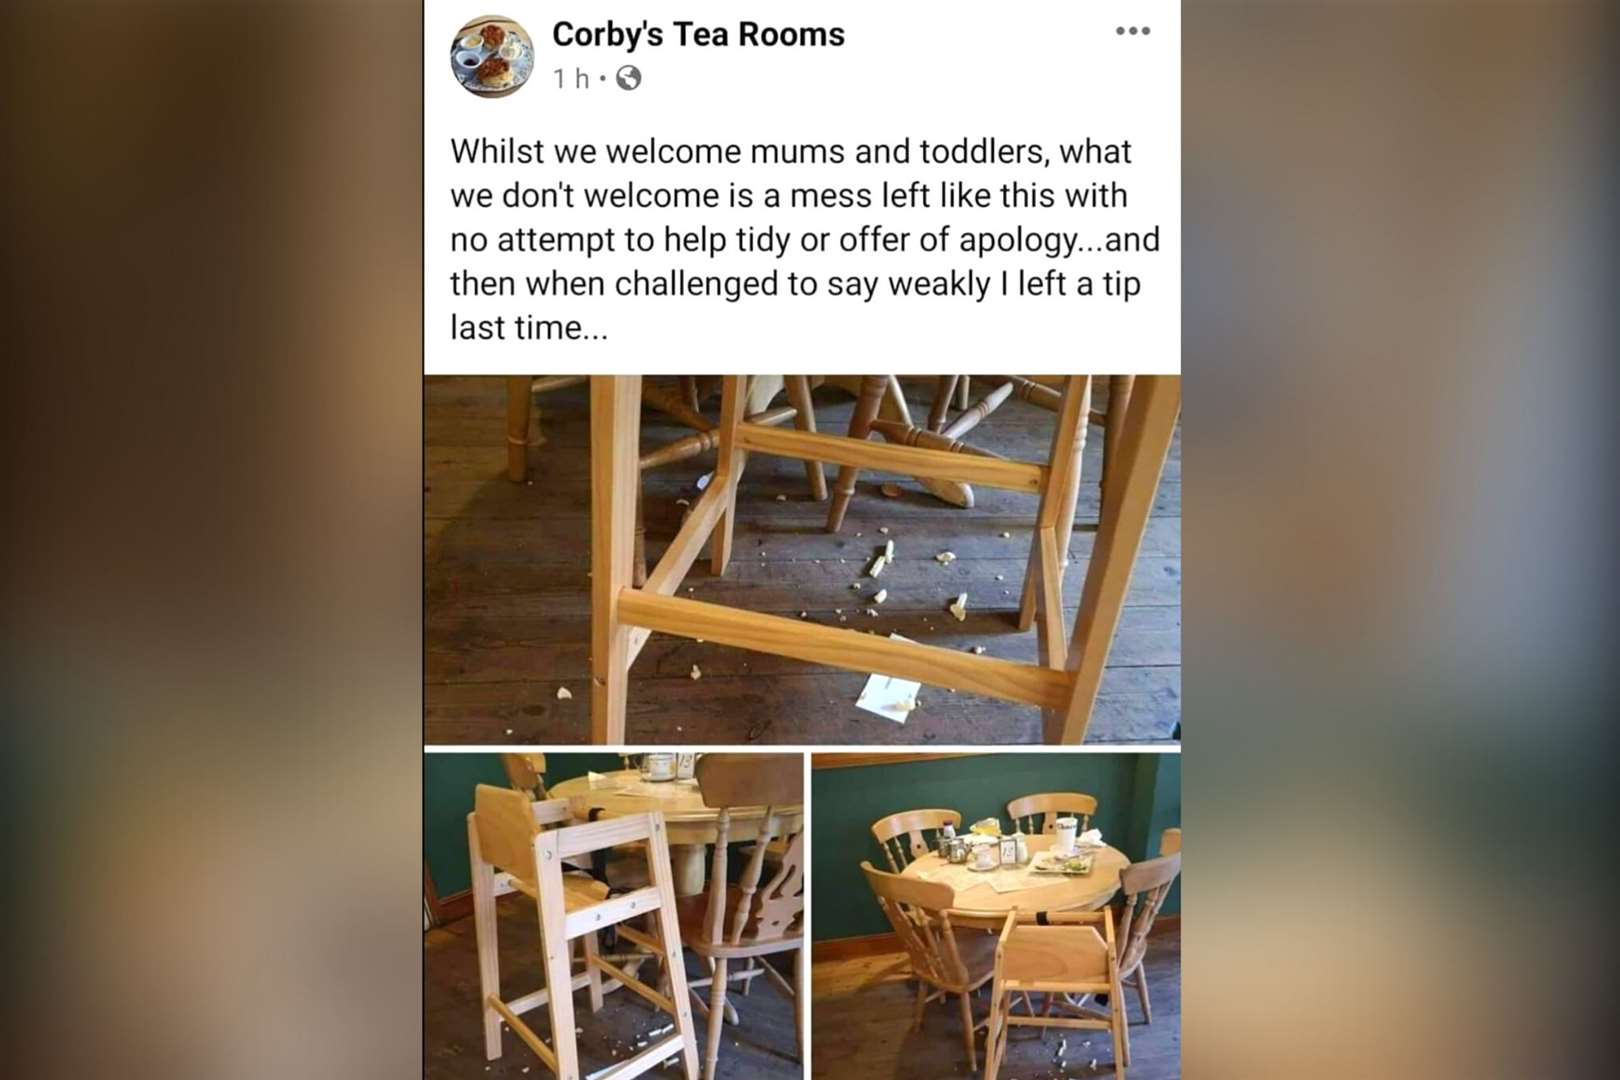 A post was shared by Corby's Tea Room on Facebook criticising mess left behind by a young mum